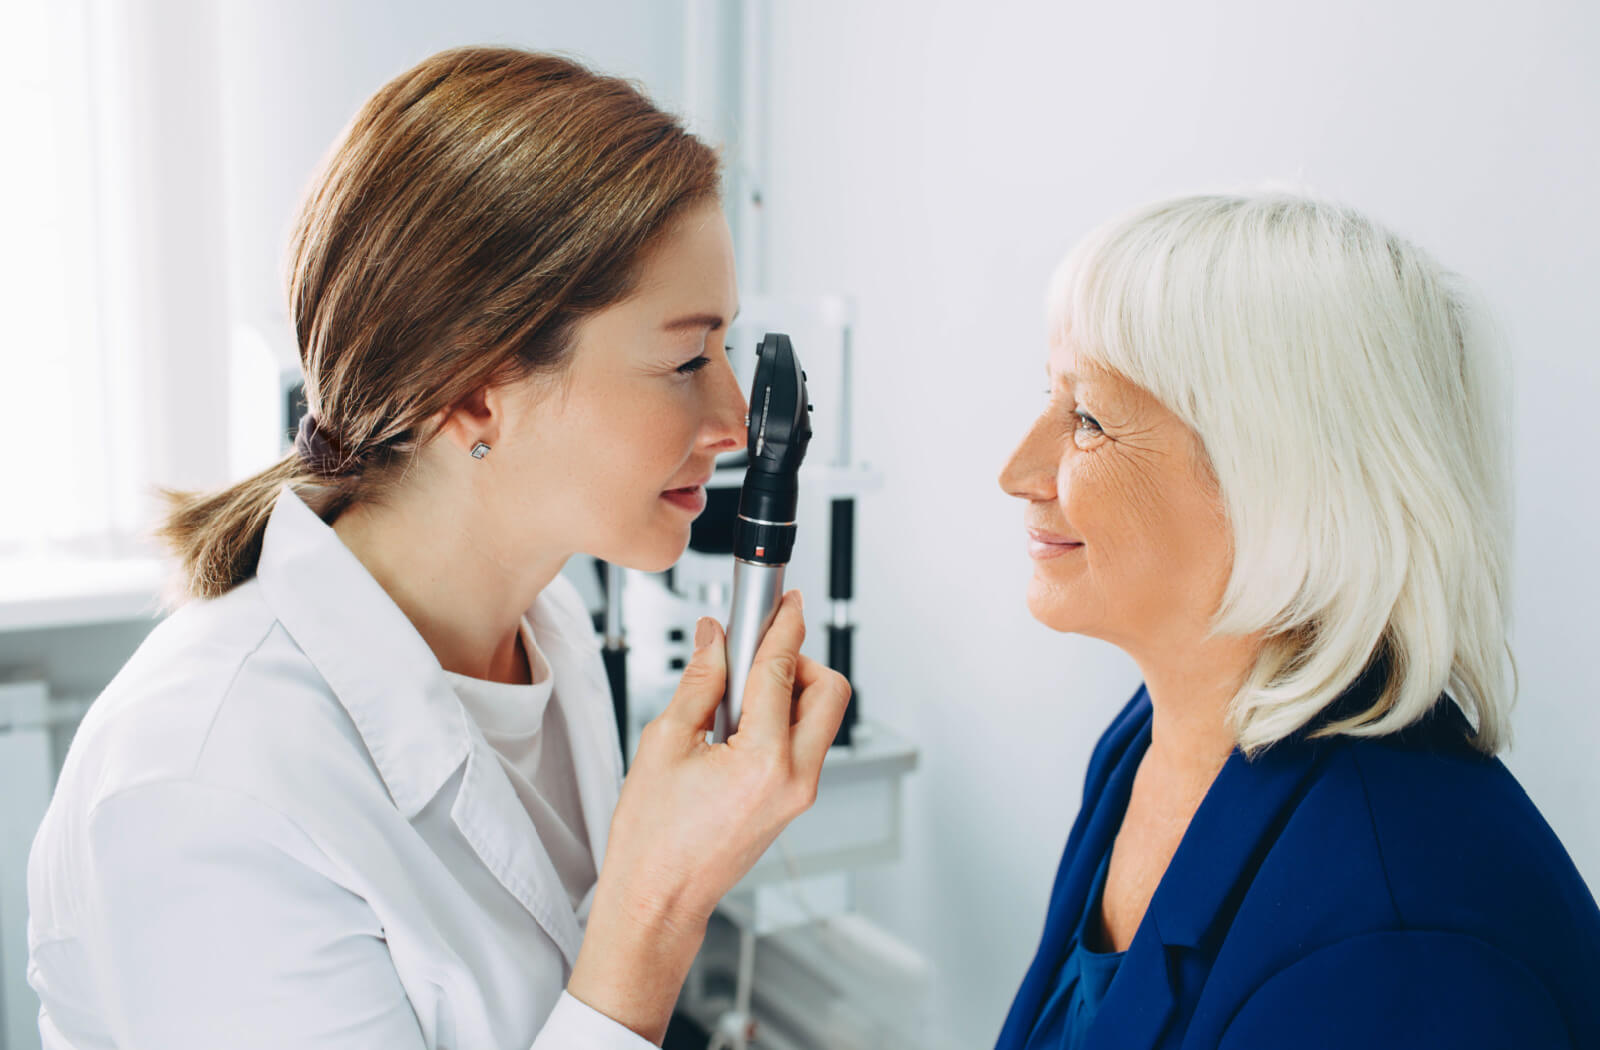 A woman optometrist is employing an ophthalmoscope while conducting an eye examination for an elderly woman